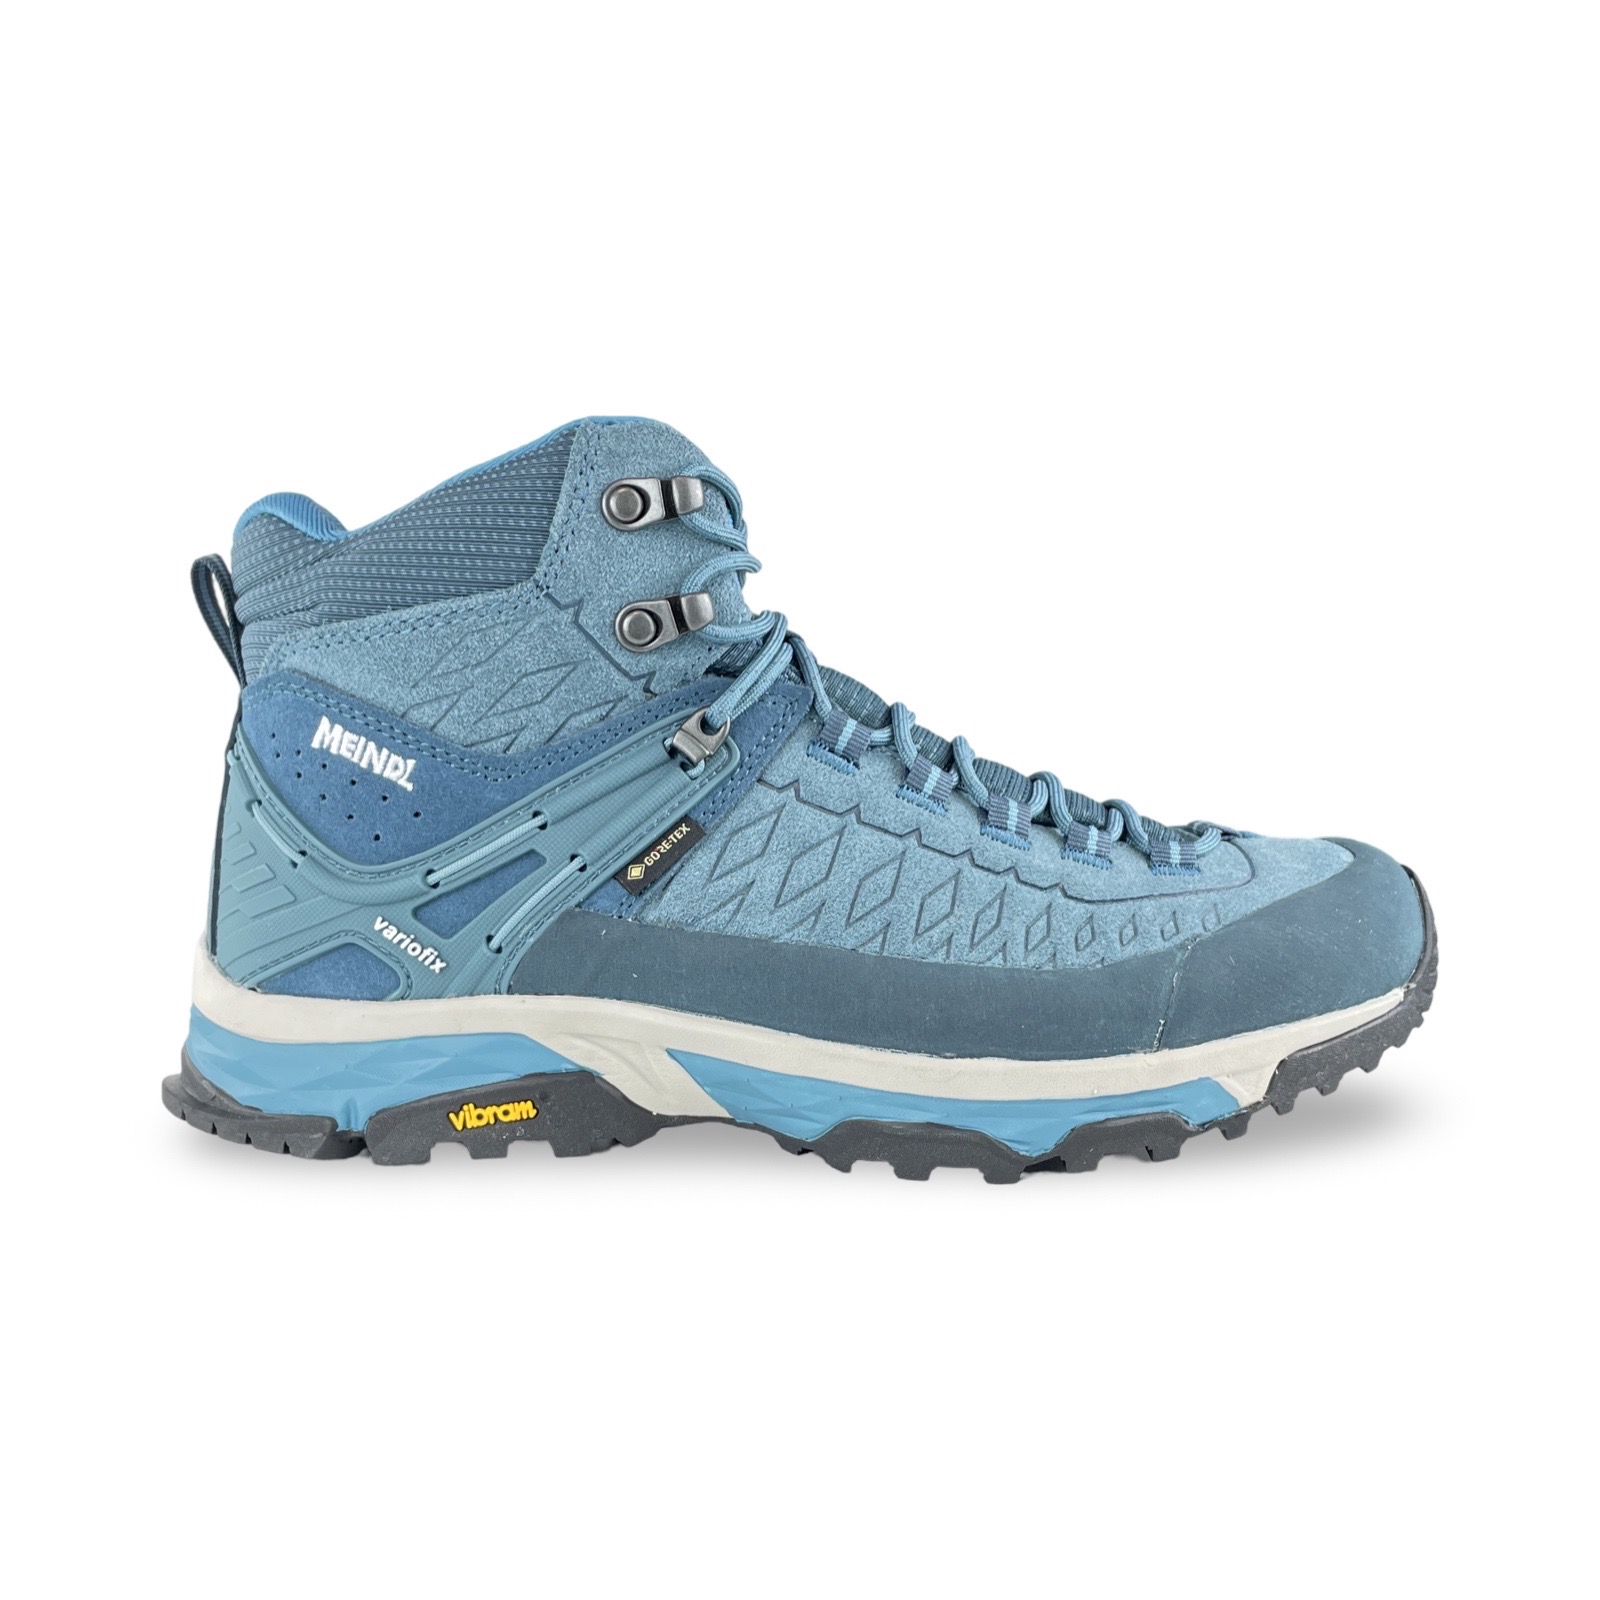 Meindl 4716 Top Trail Lady Mid GTX Turquoise